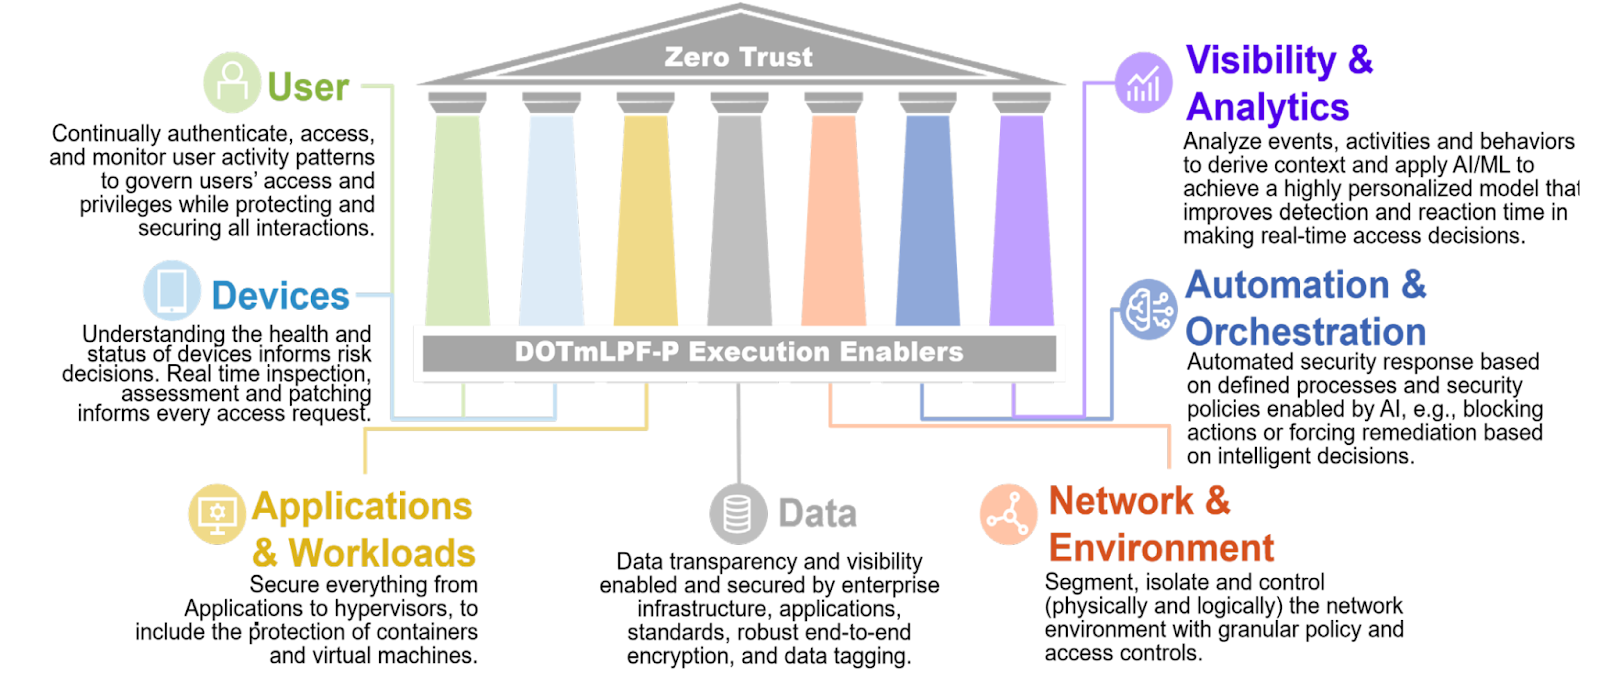 DoD Illustration of Zero Trust Pillars, User, Devices, Applications and Workloads, Data, Network and Environment, Automation and Orchestration, Visibility and Analytics